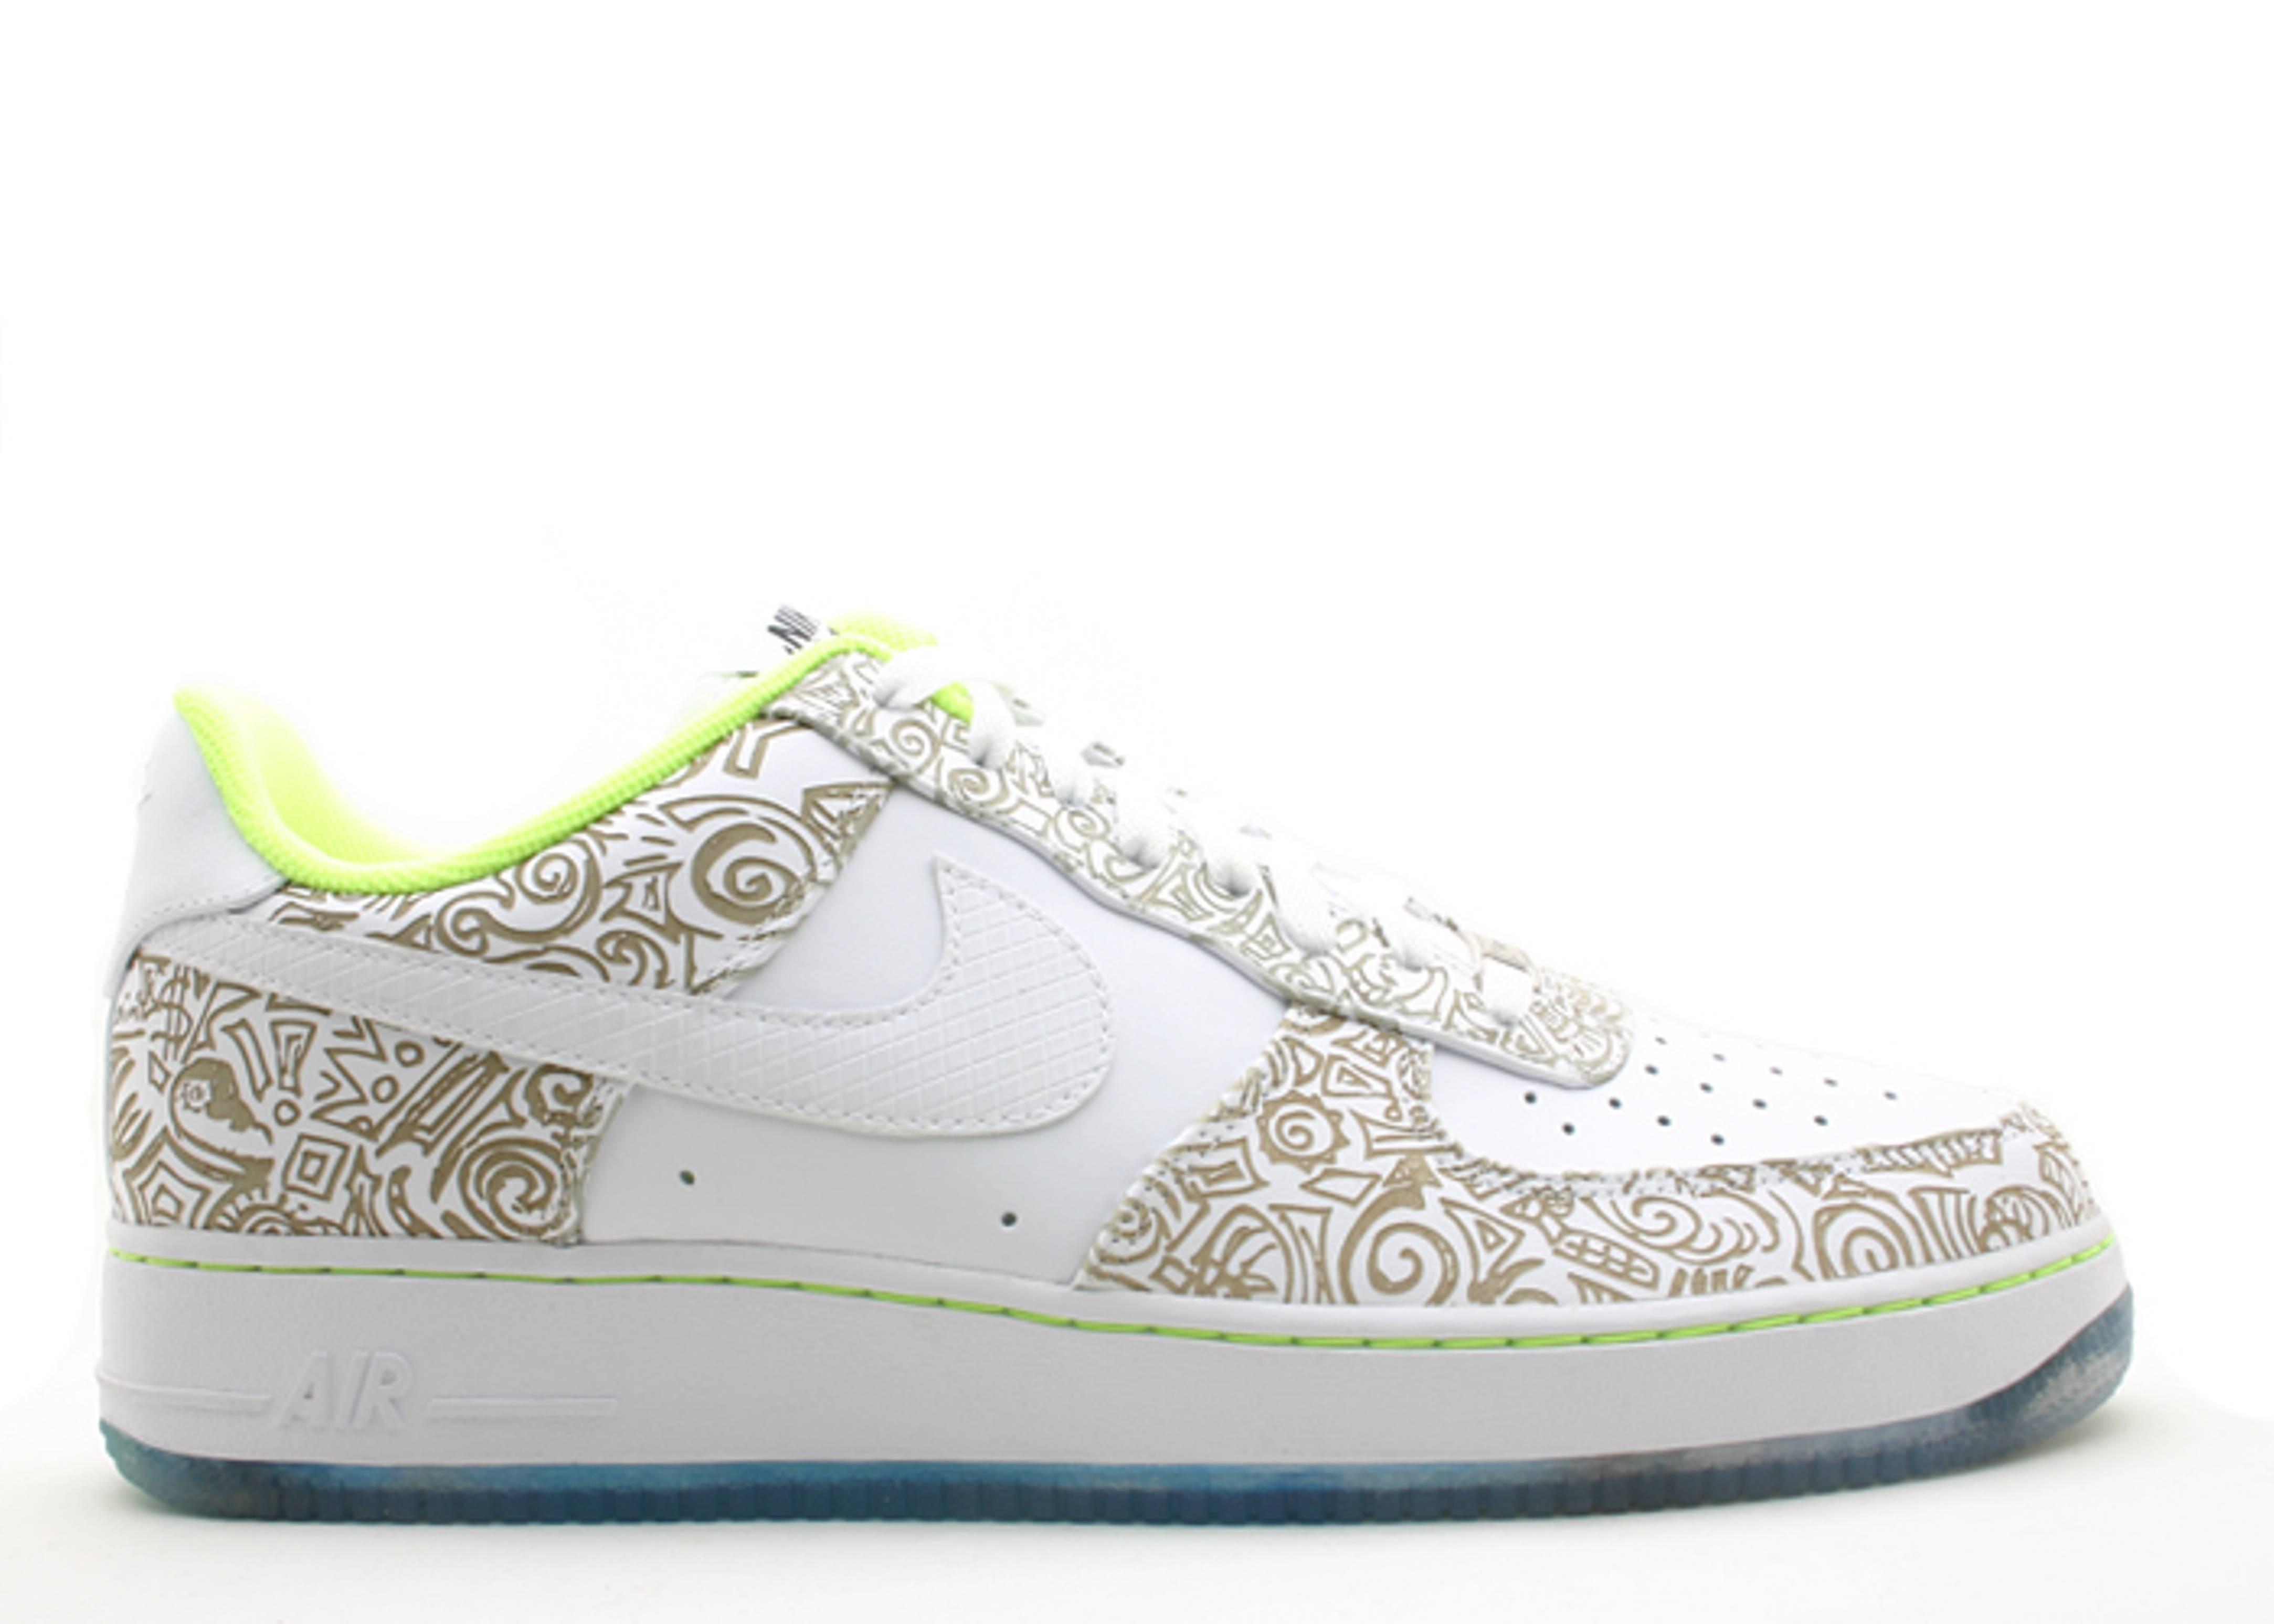 Nike Air Force 1 Low Doernbecher (2008/2013) in White for Men - Save 27 ...